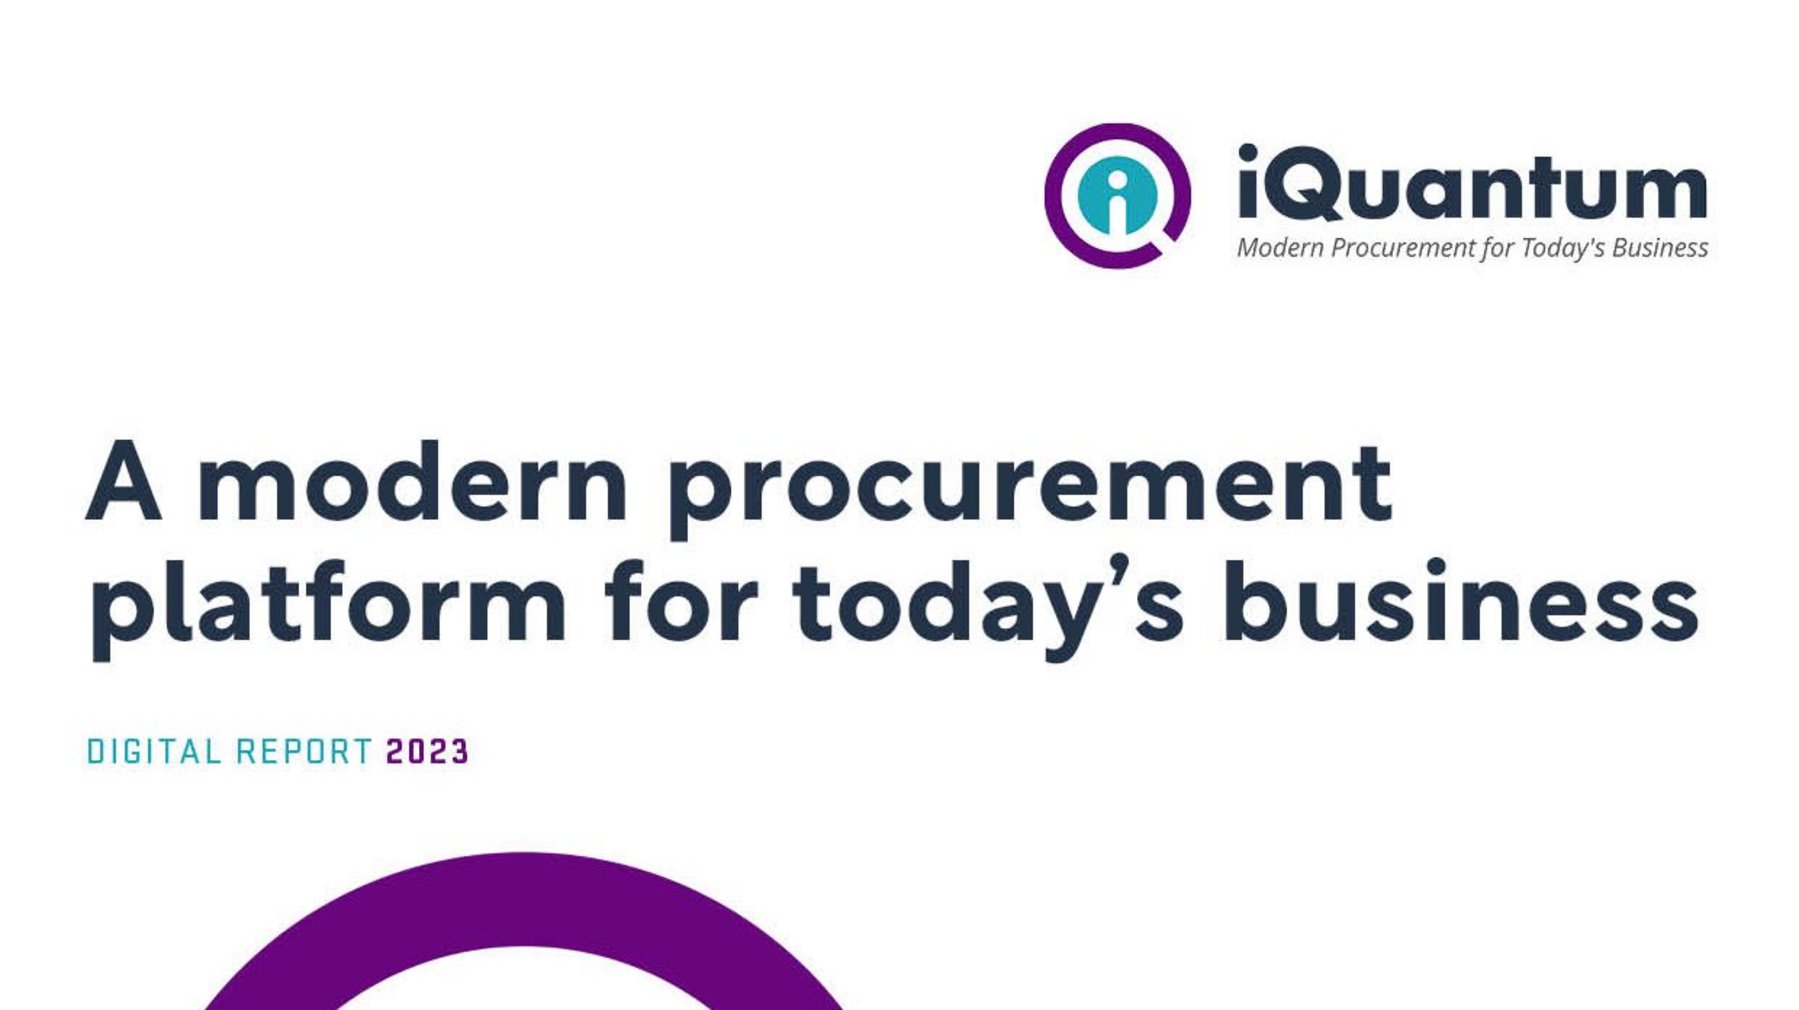 iQuantum: A modern procurement platform for today’s business